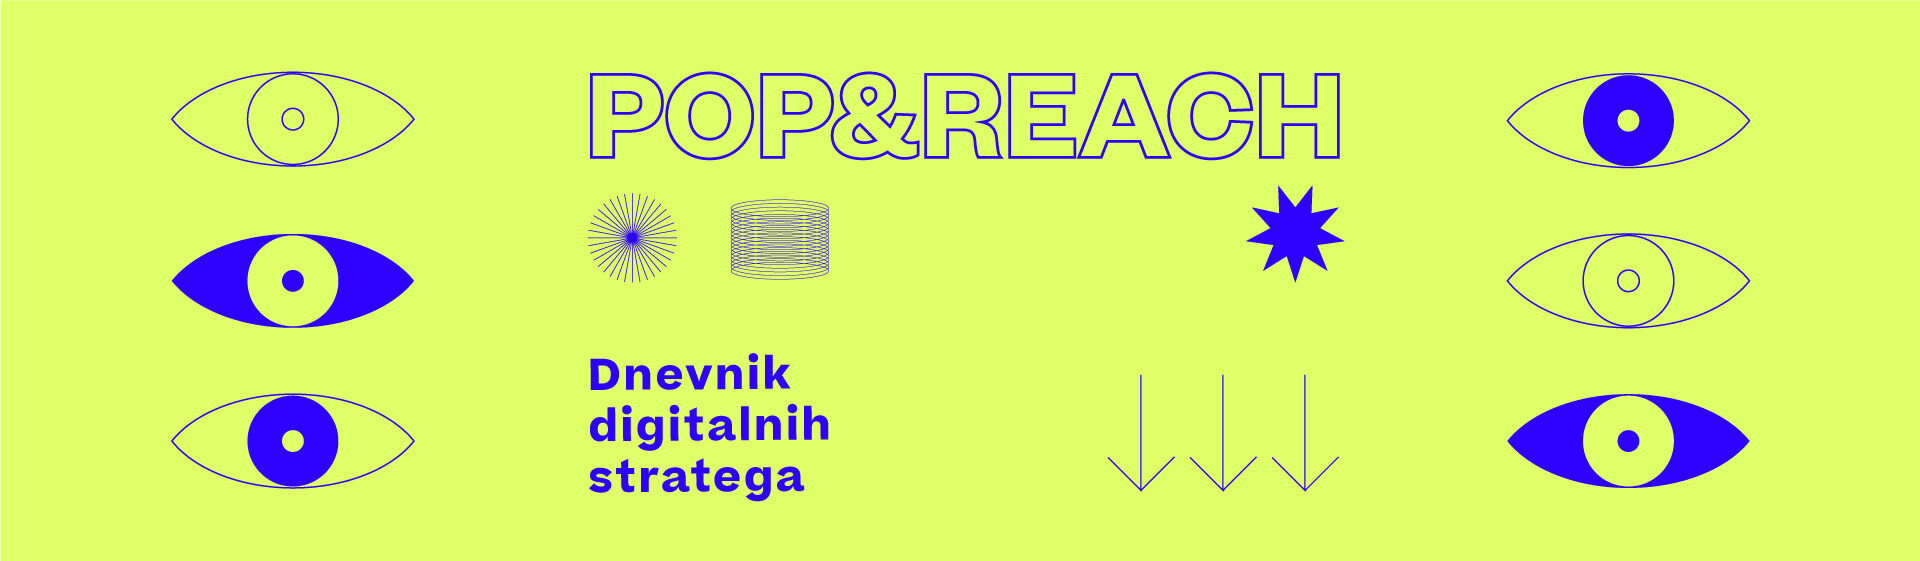 pop and reach baner